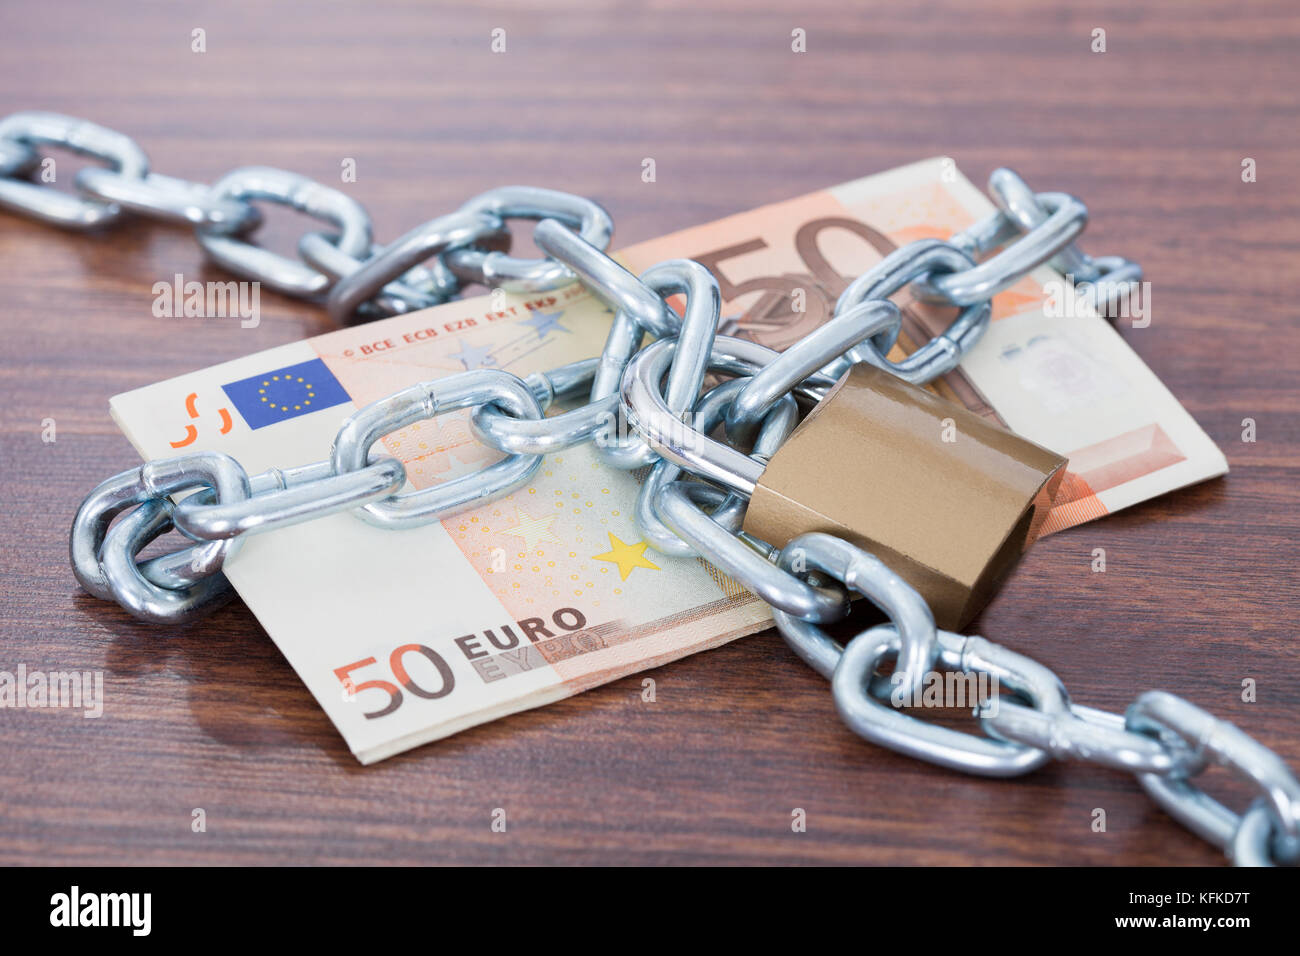 Fifty euro notes with chain and padlock on table Stock Photo